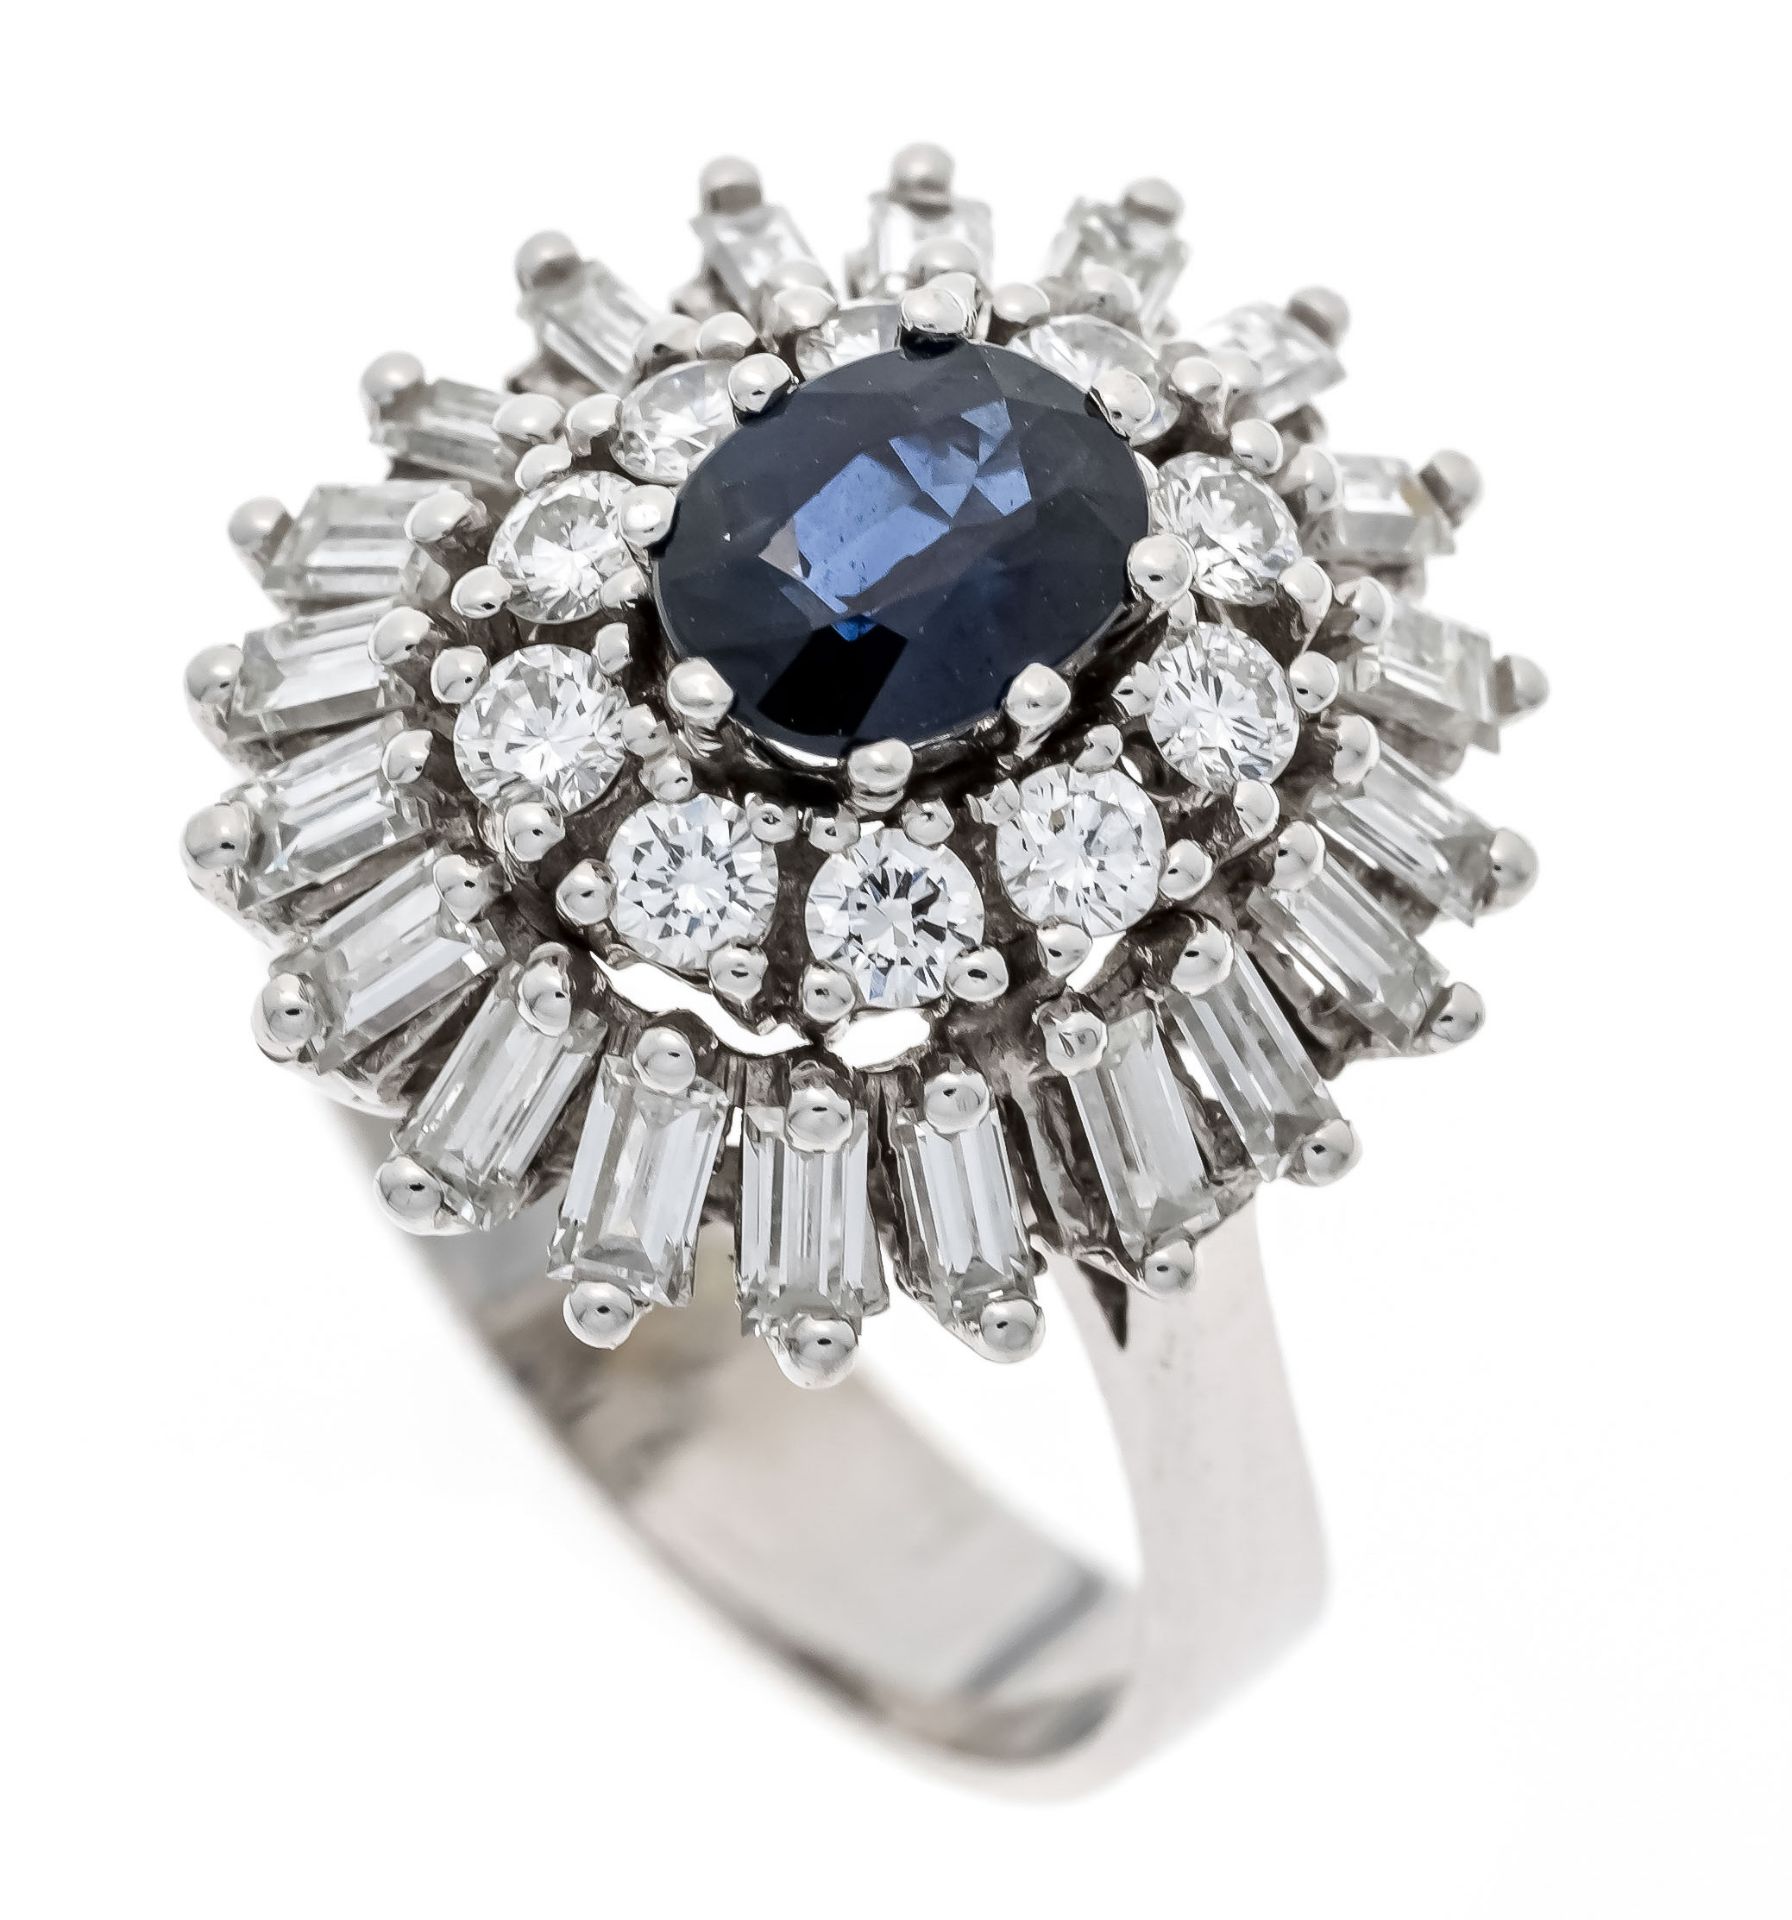 Sapphire-brilliant ring WG 585/000 with a very good oval faceted sapphire 0.77 ct in an intense blue